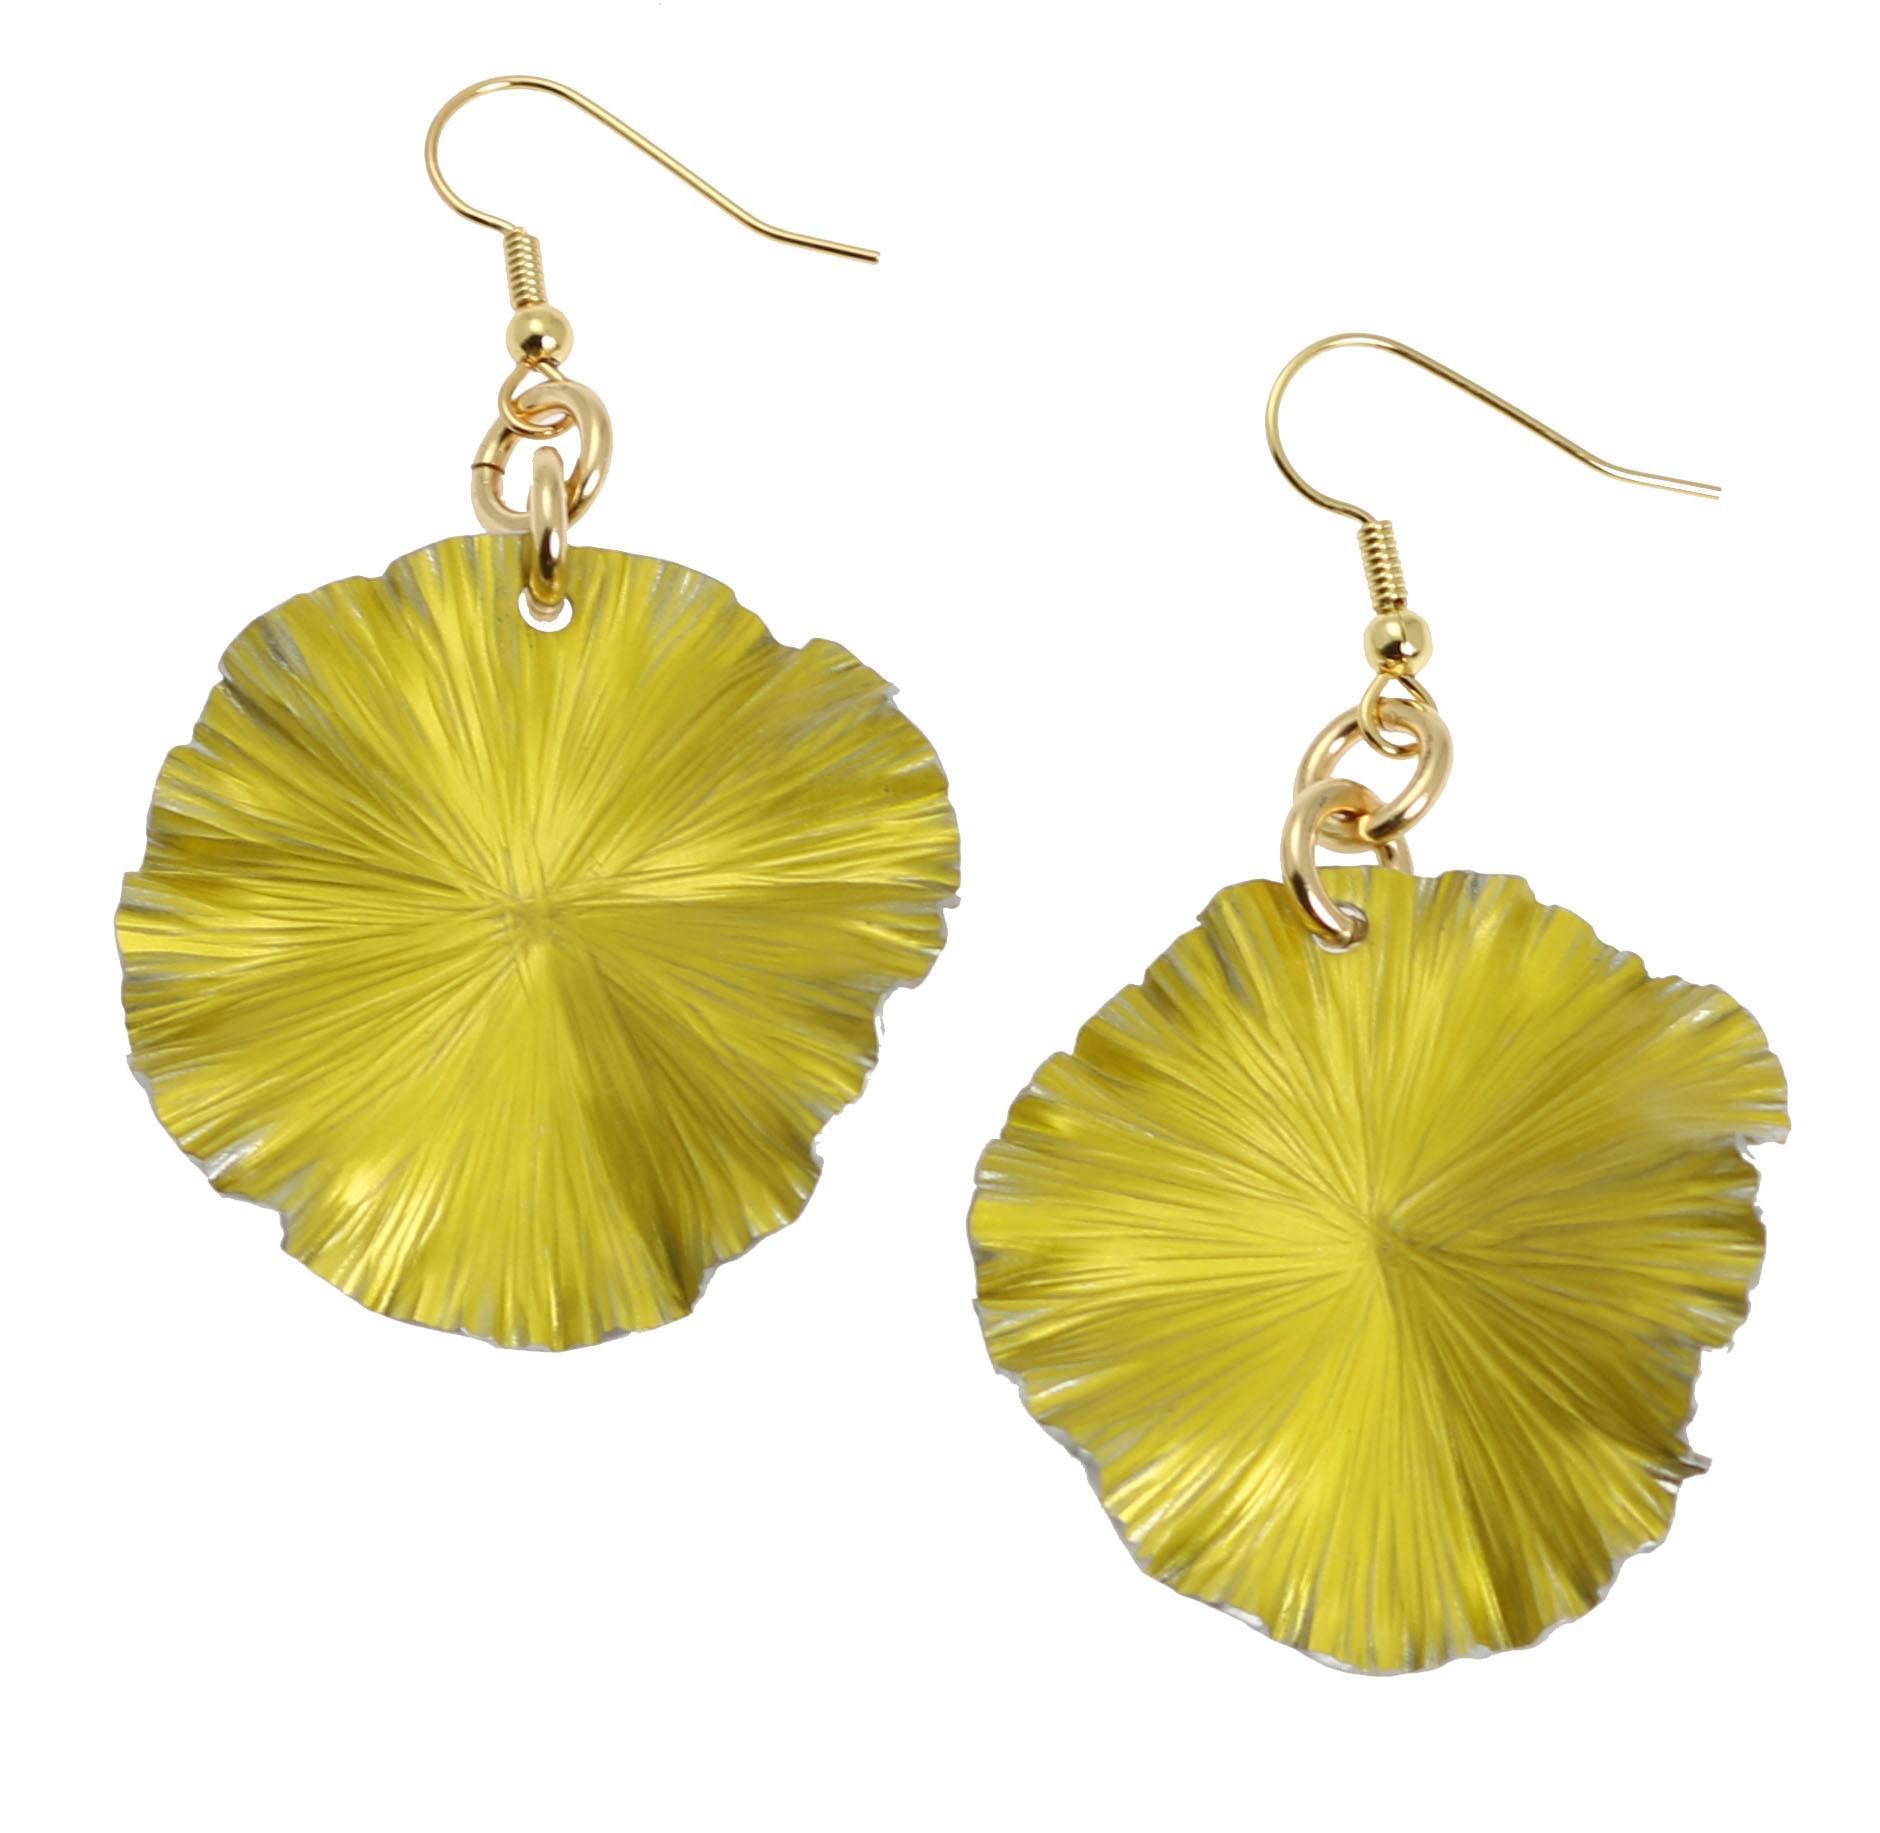 Yellow Anodized Aluminum Lily Pad Earrings